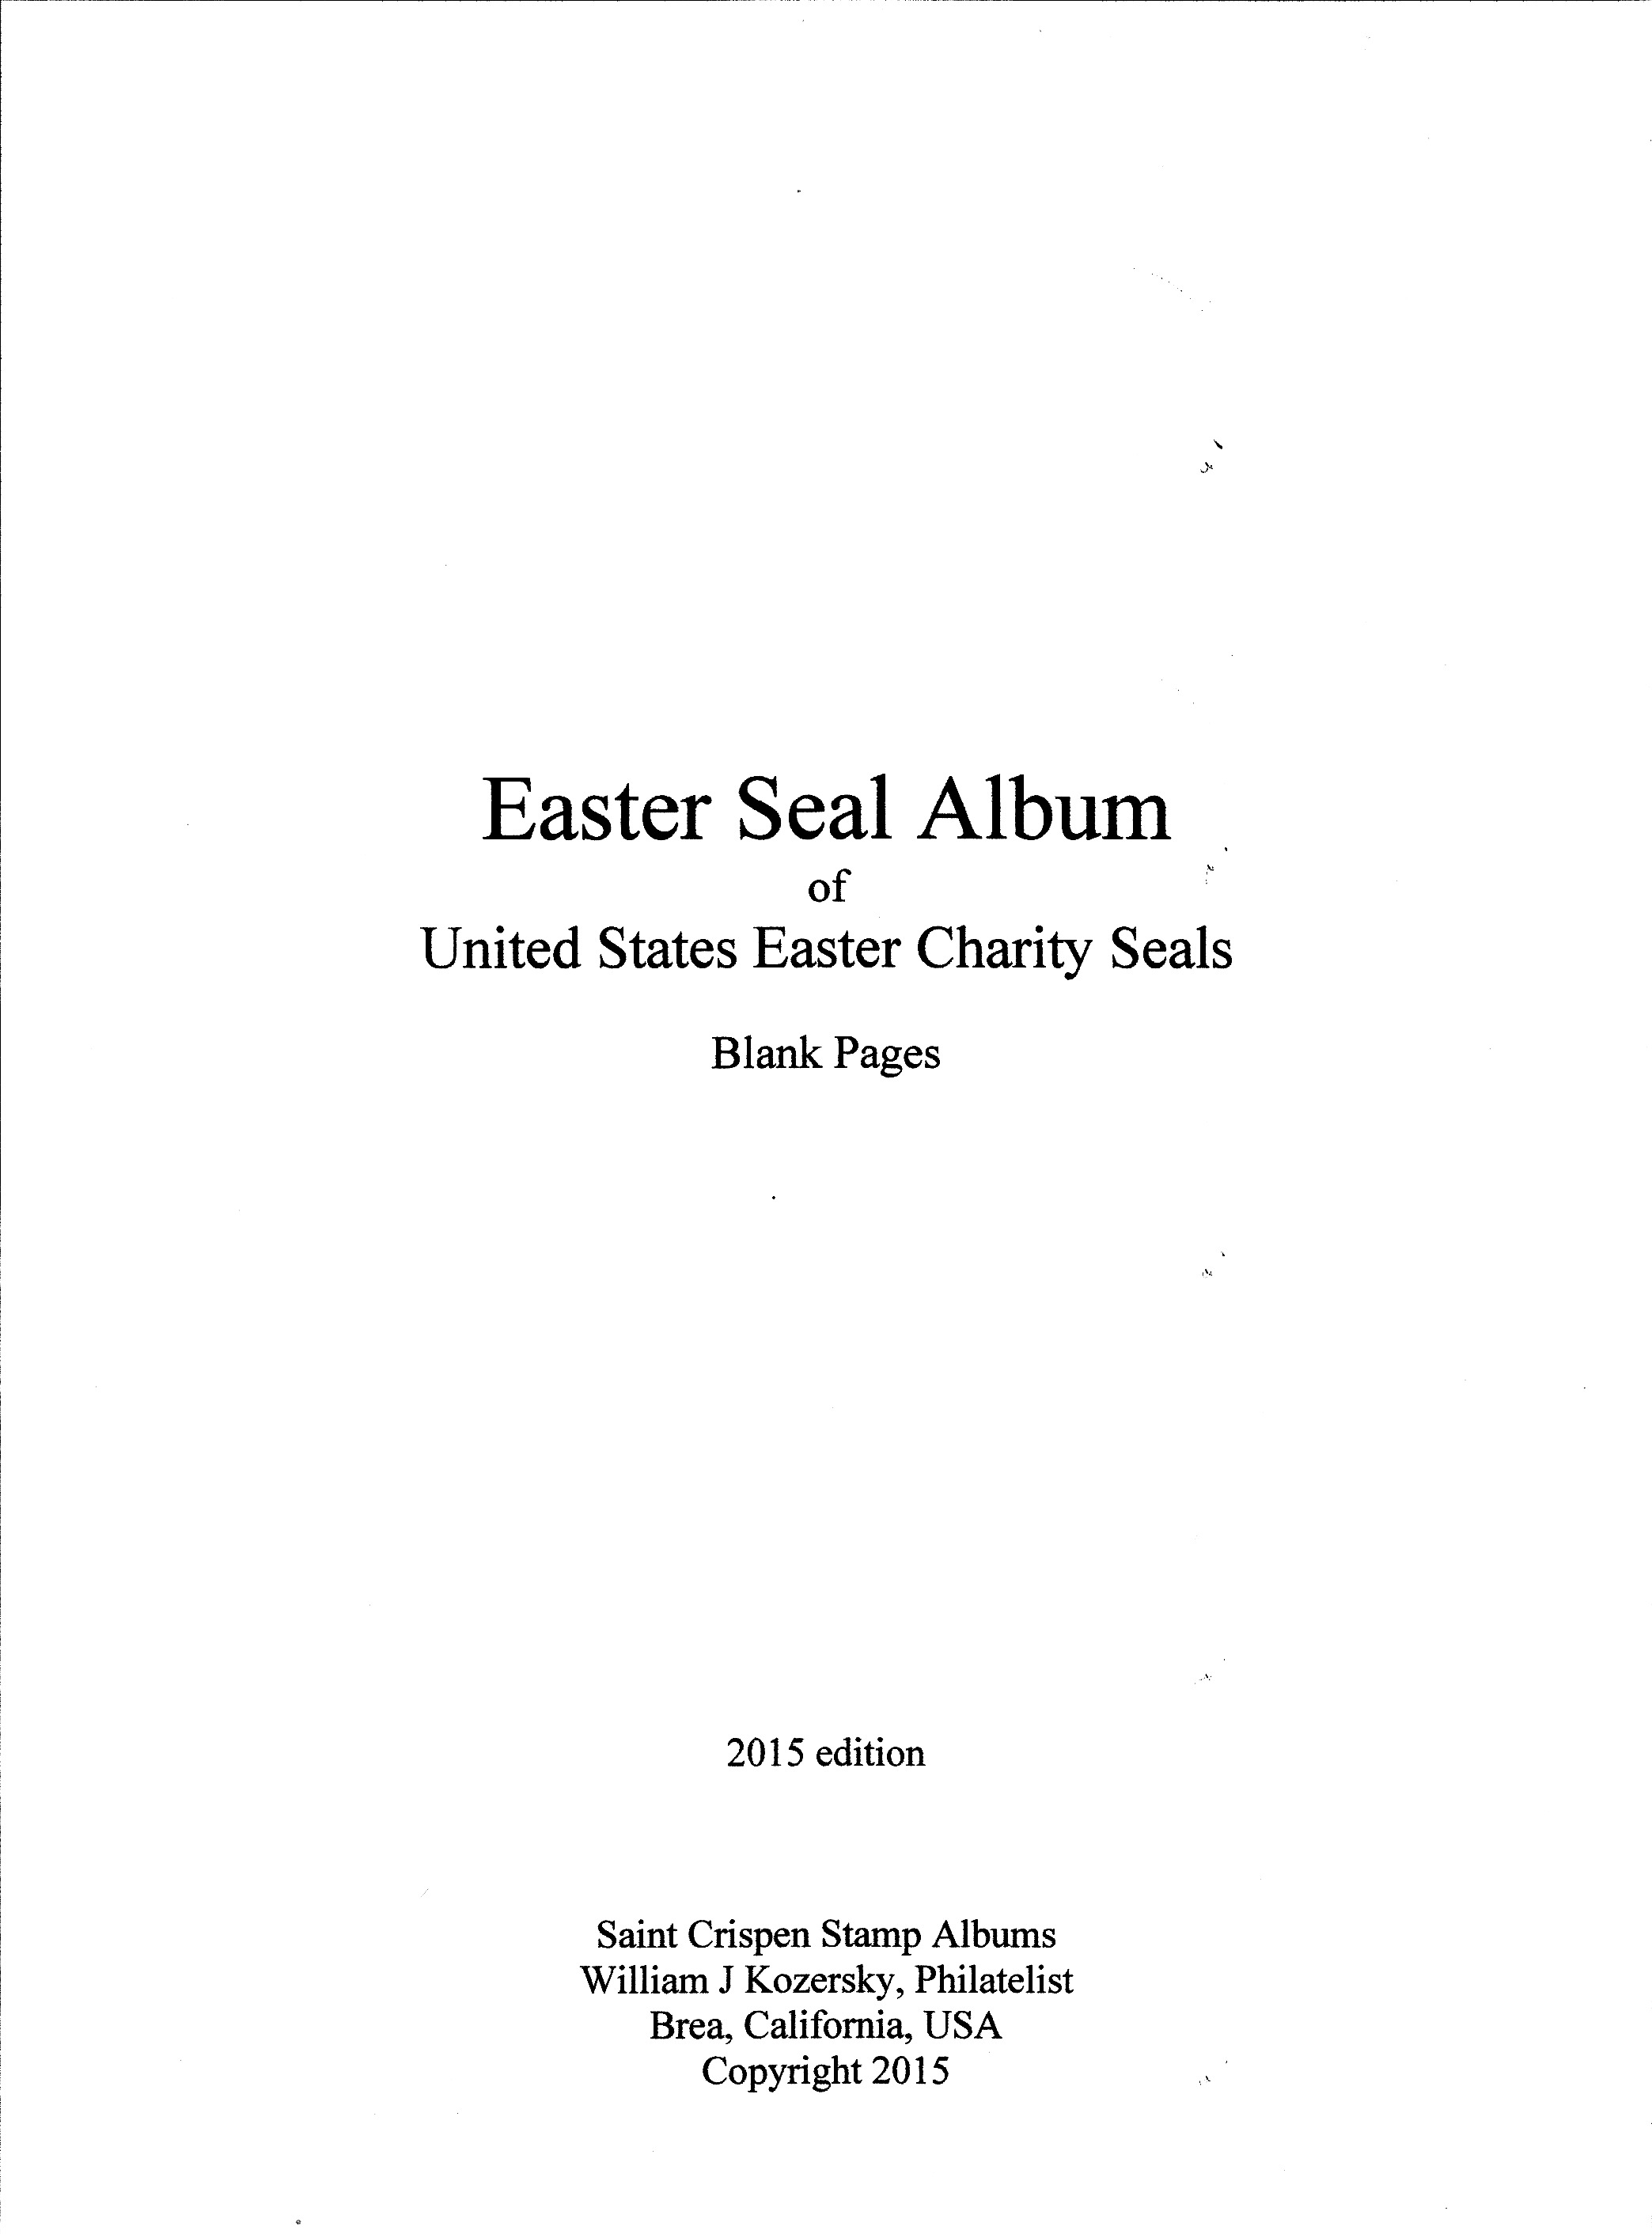 U.S. National Easter Seal Album Pages, blank pages with title and border (white)